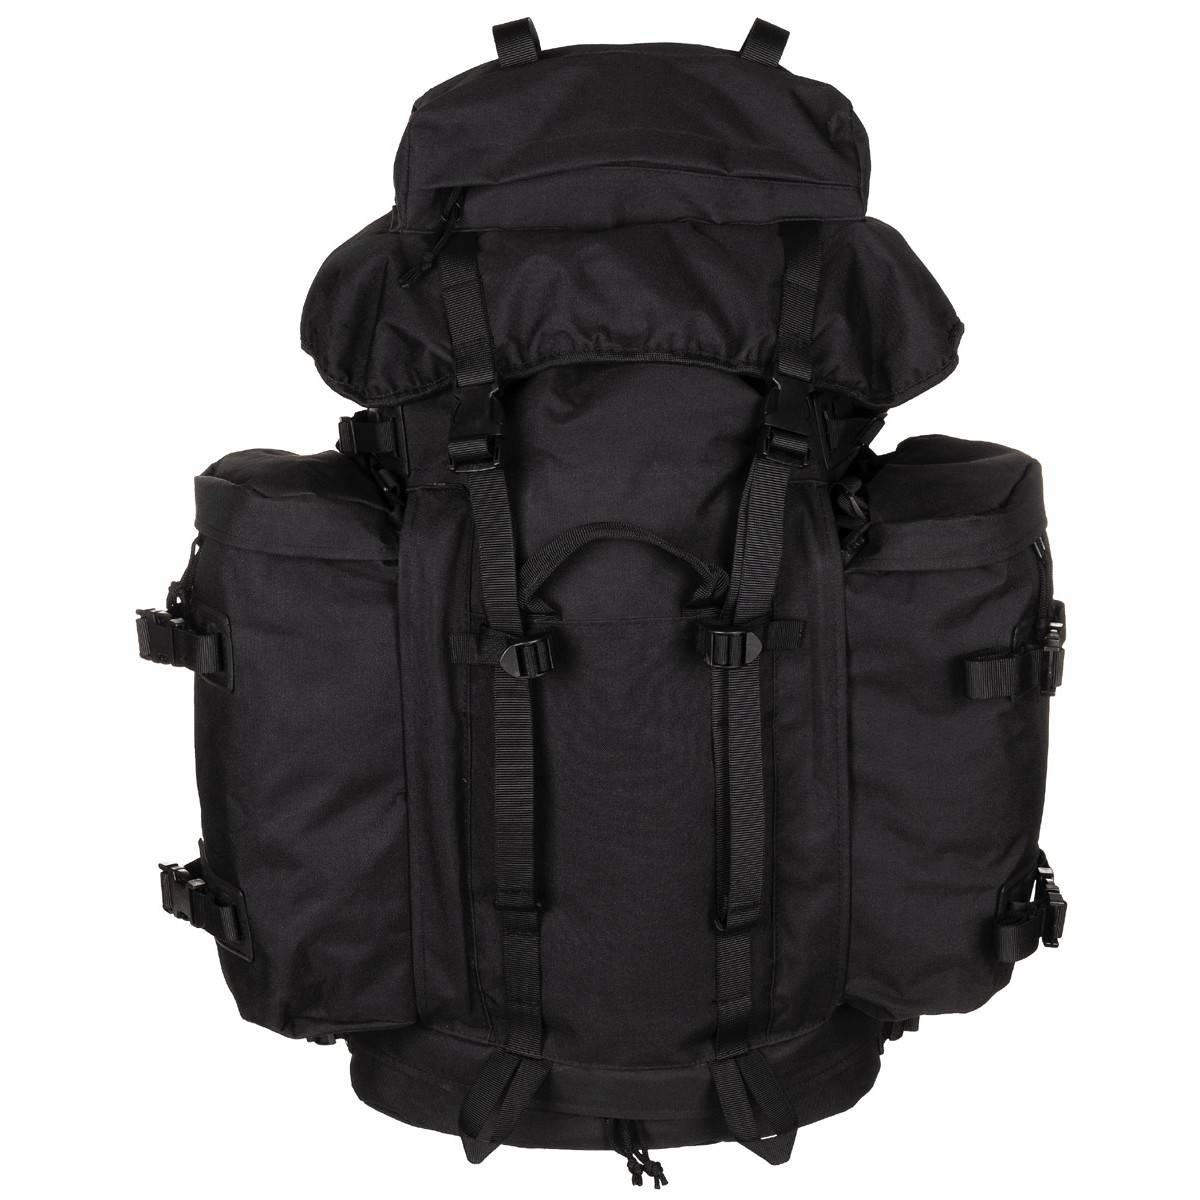 BUNDESWEHR MOUNTAIN BACKPACK - WITH 2 SIDE BAGS - 80 L - MFH